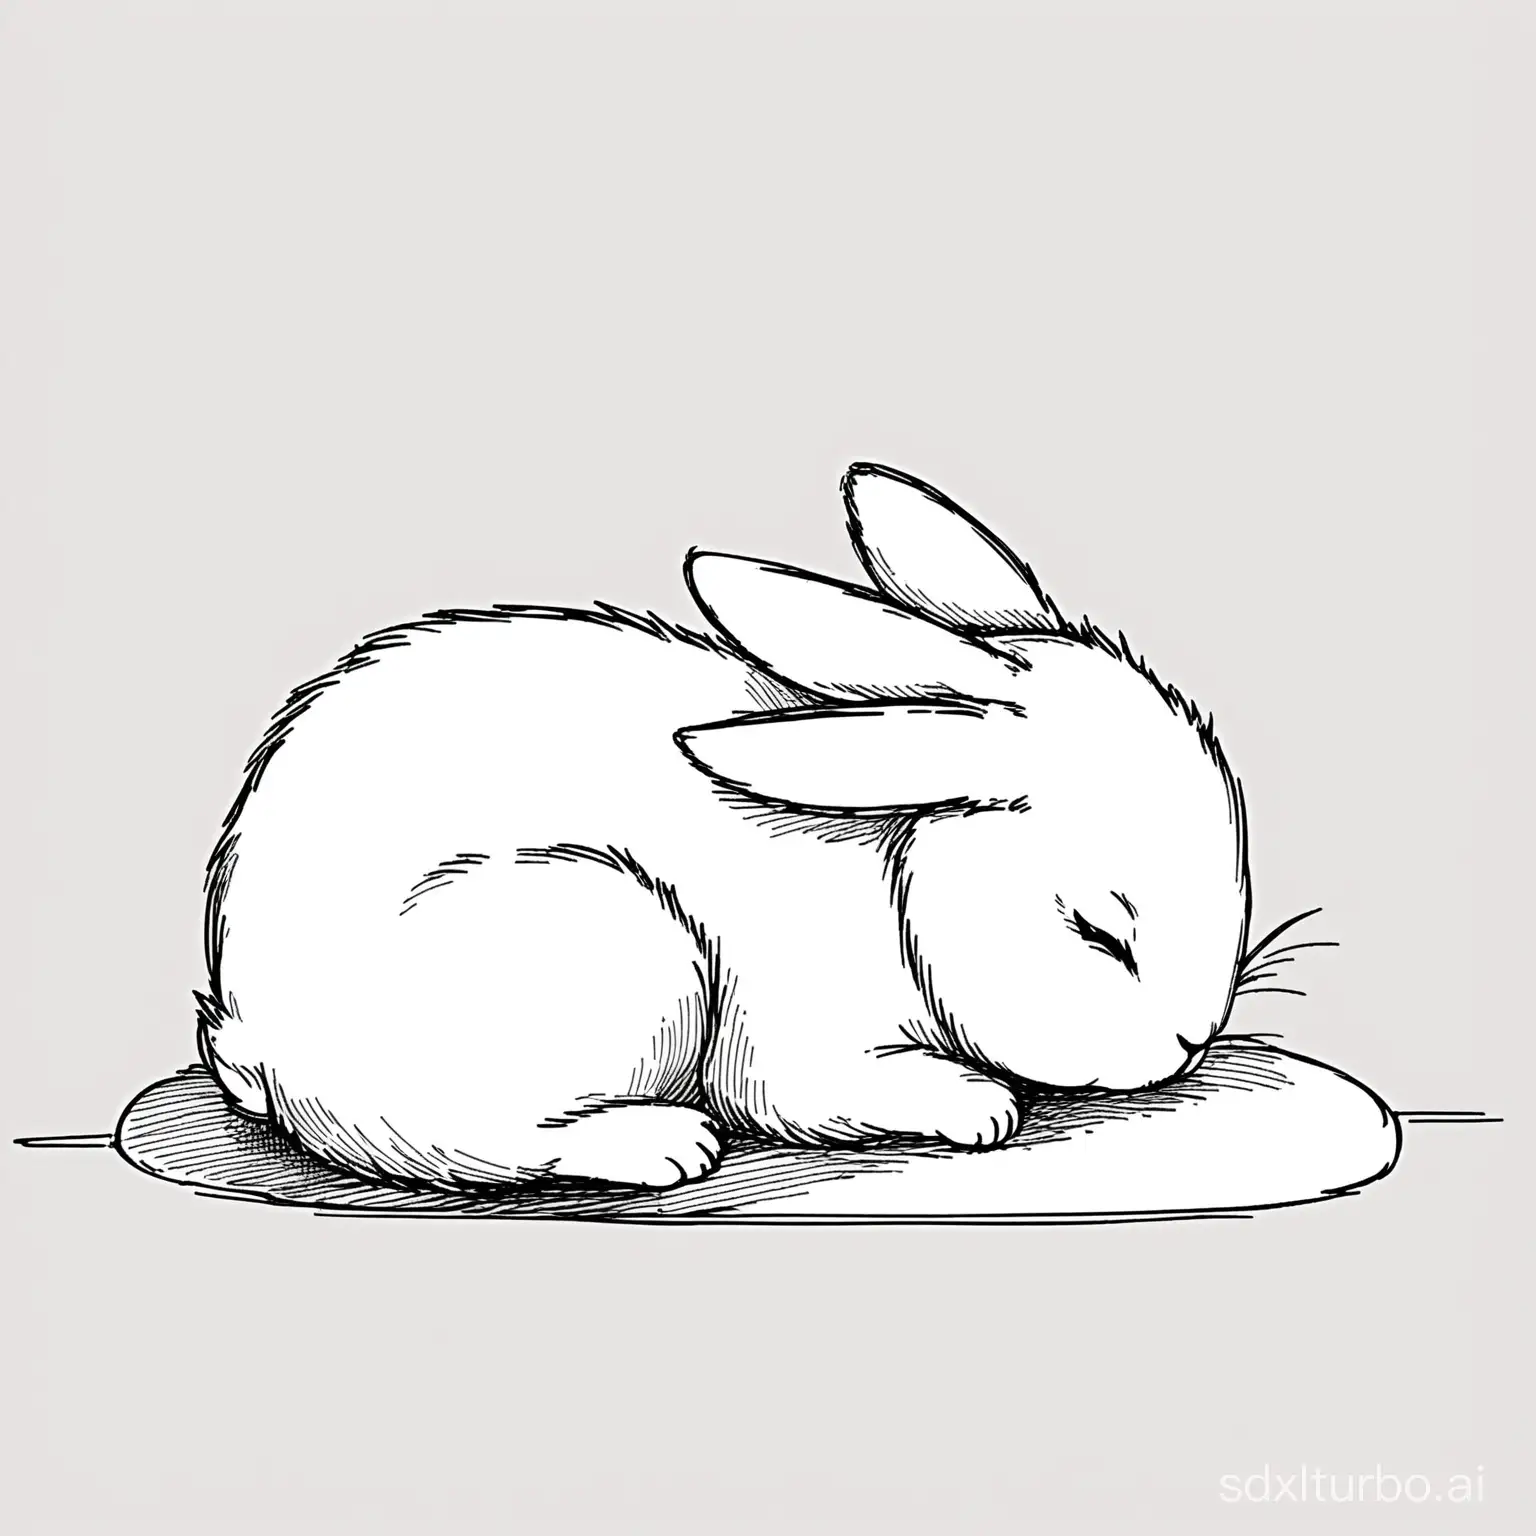 Cartoon-Rabbit-Sleeping-Whimsical-Black-and-White-Sketch-Line-Drawing